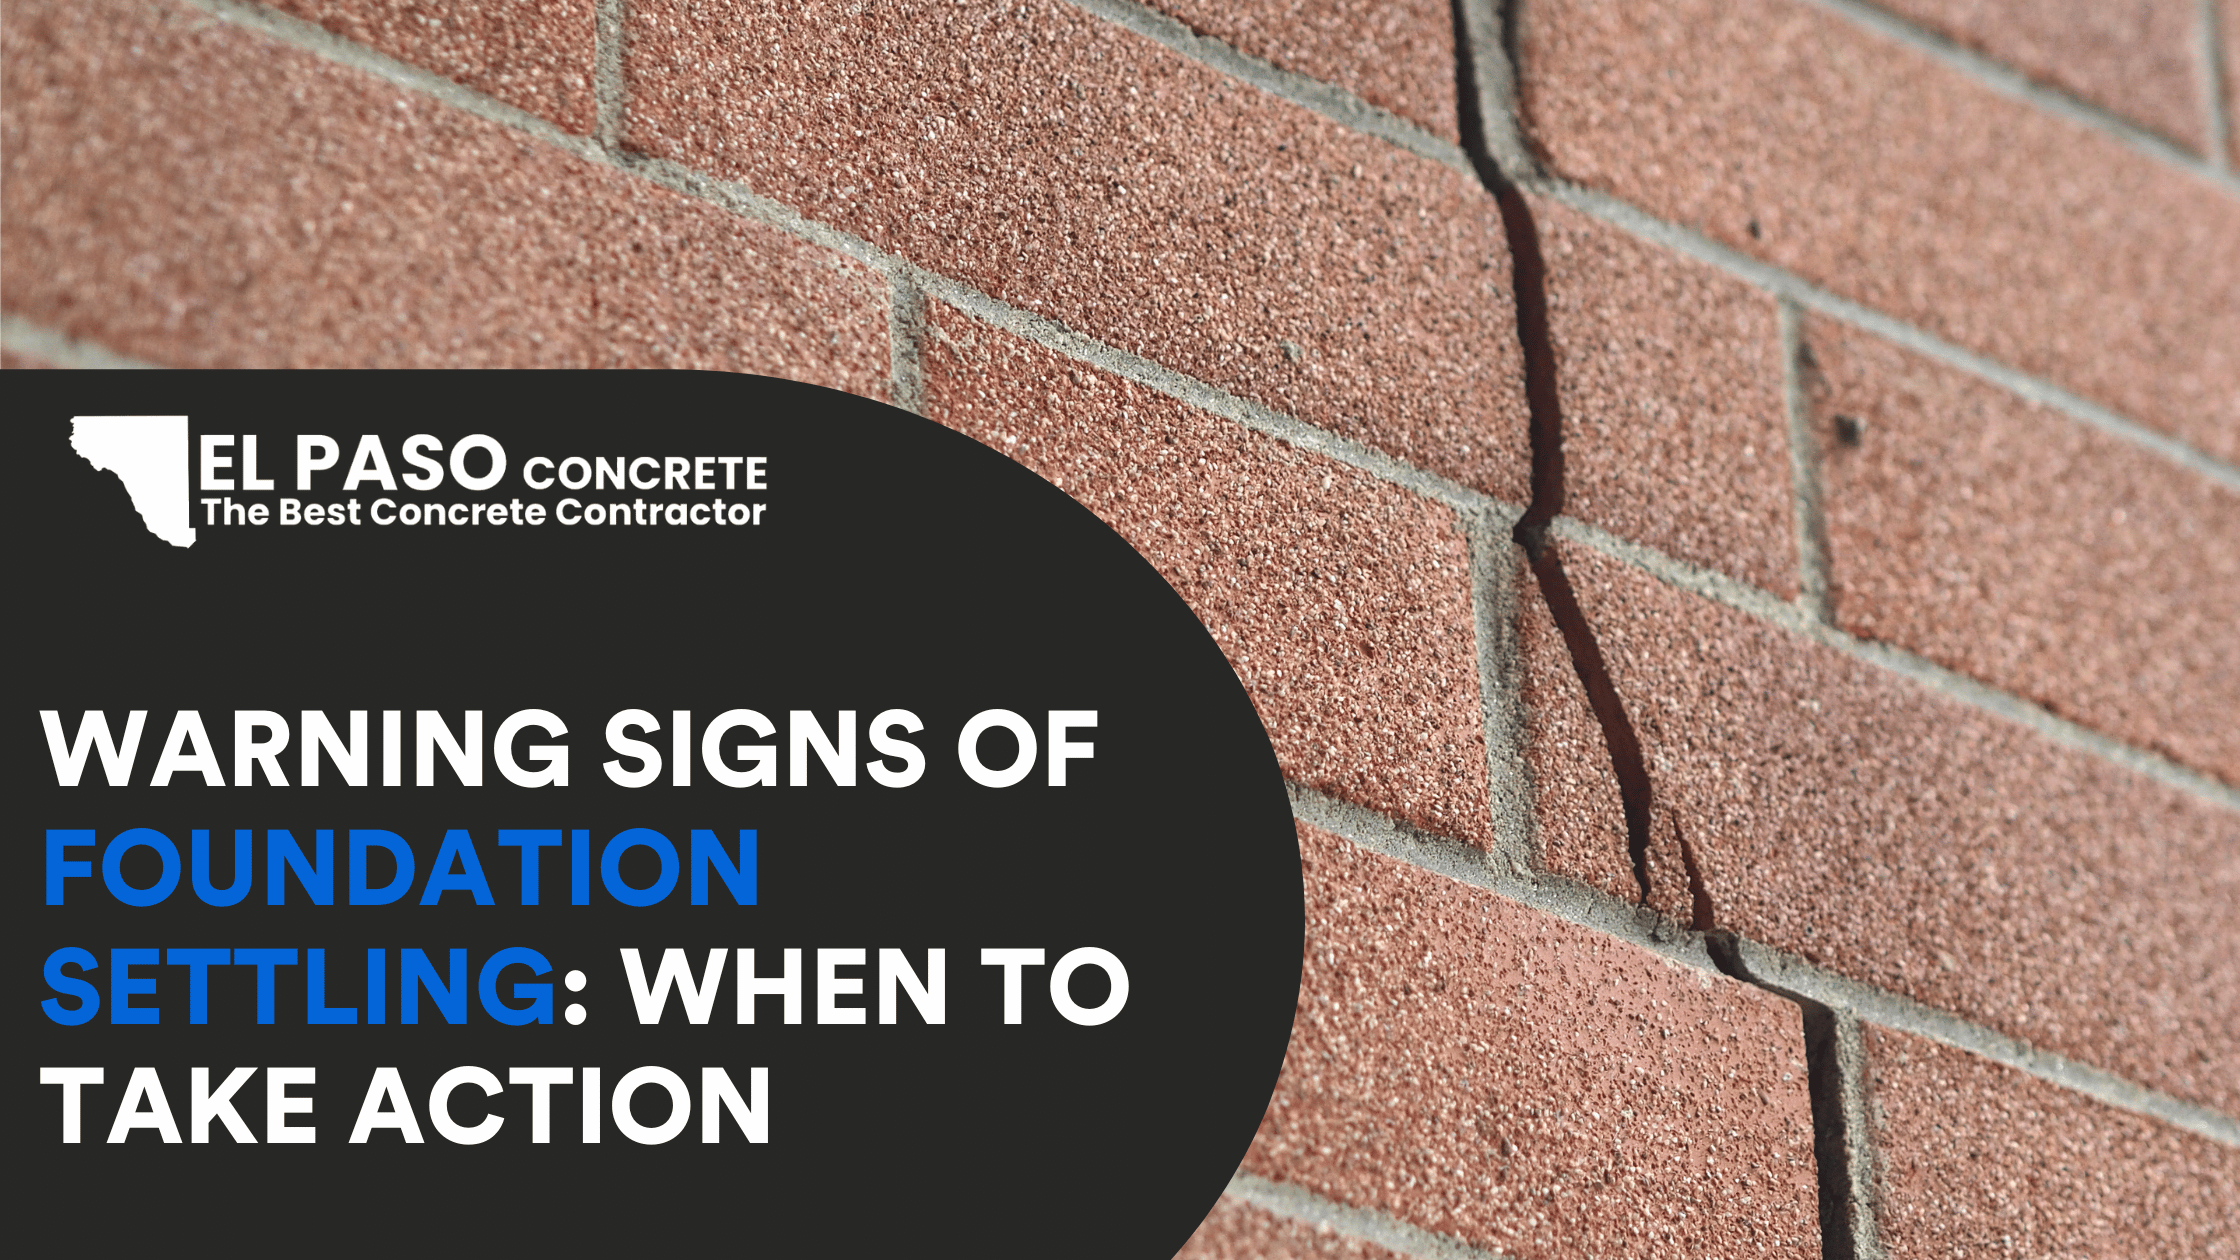 Warning Signs of Foundation Settling: When to Take Action